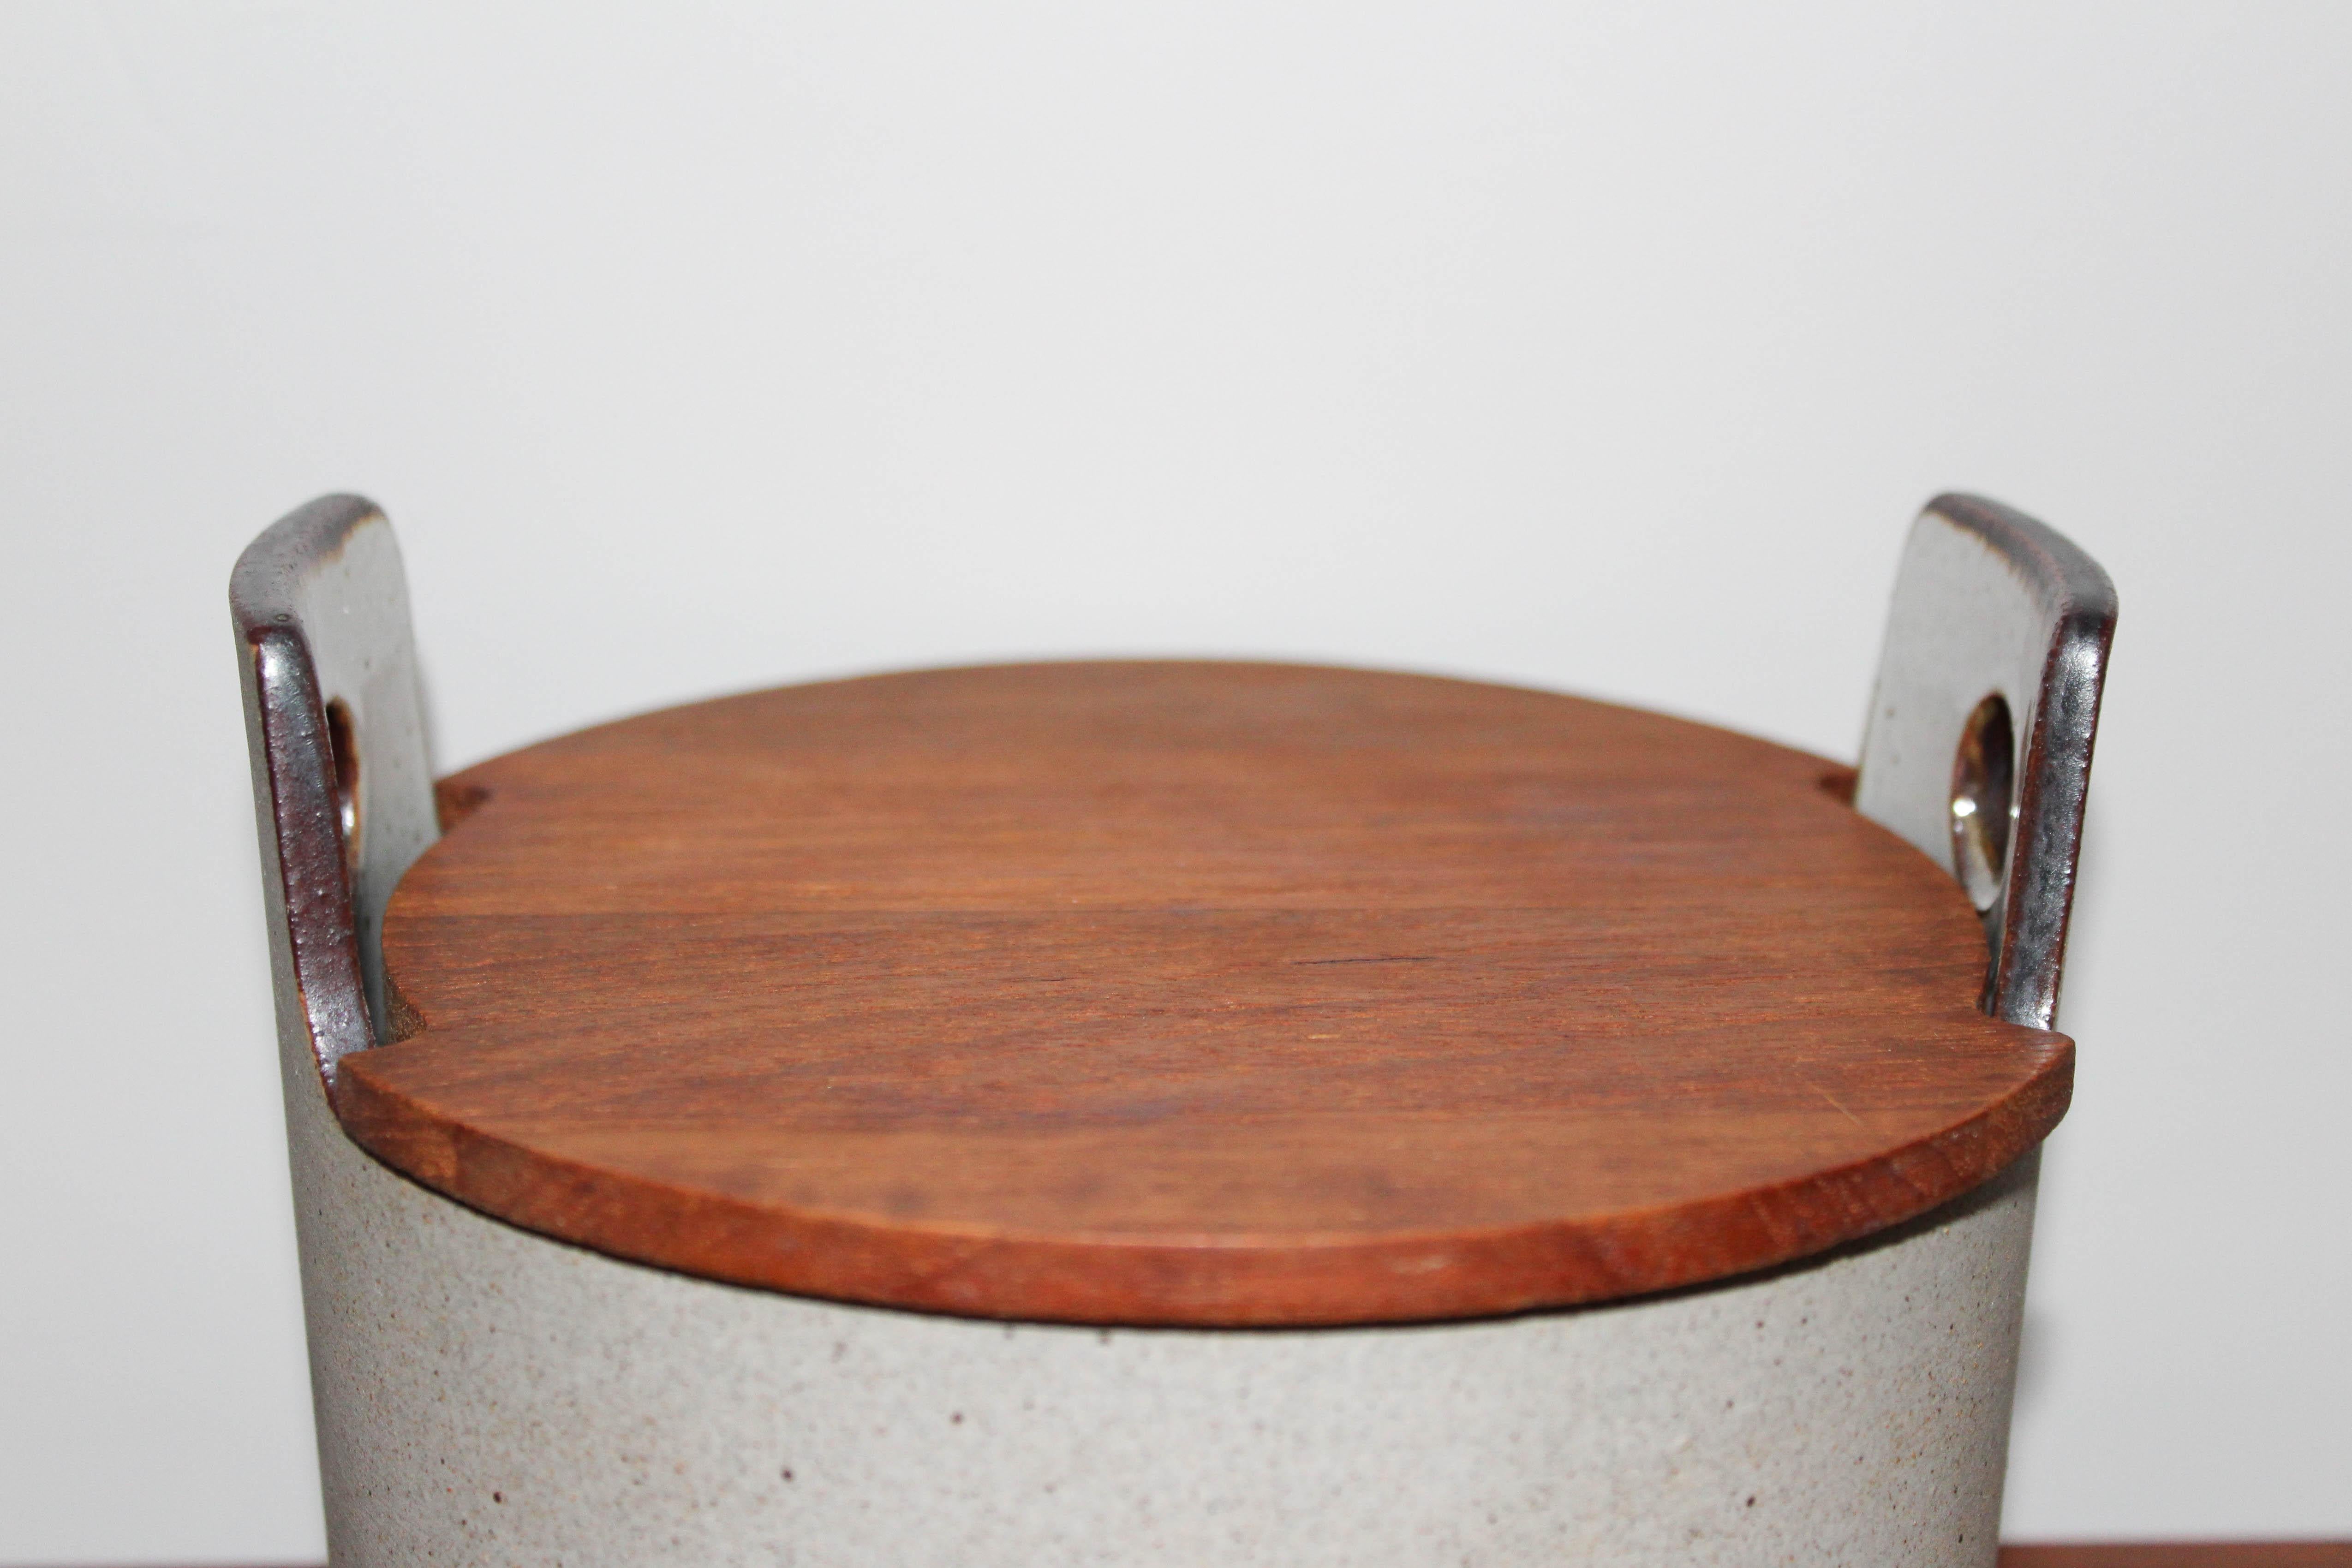 Midcentury Danish Ceramic Bowl with Teak Lid by Knabstrup Atelier In Good Condition For Sale In Malmo, SE